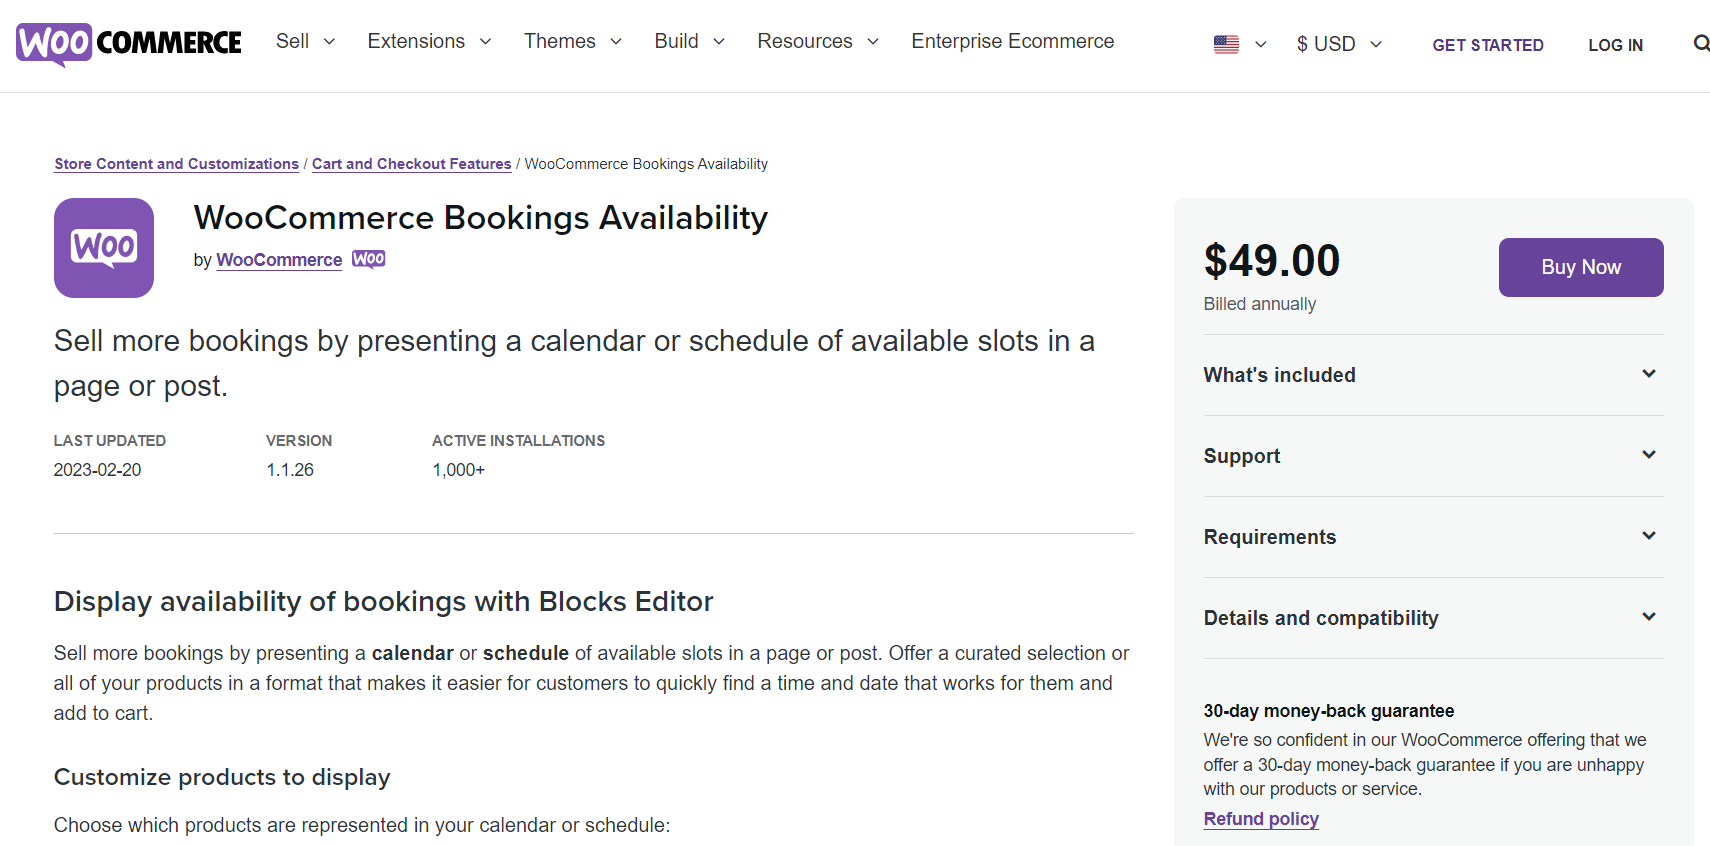 WooCommerce Bookings Availability plugin